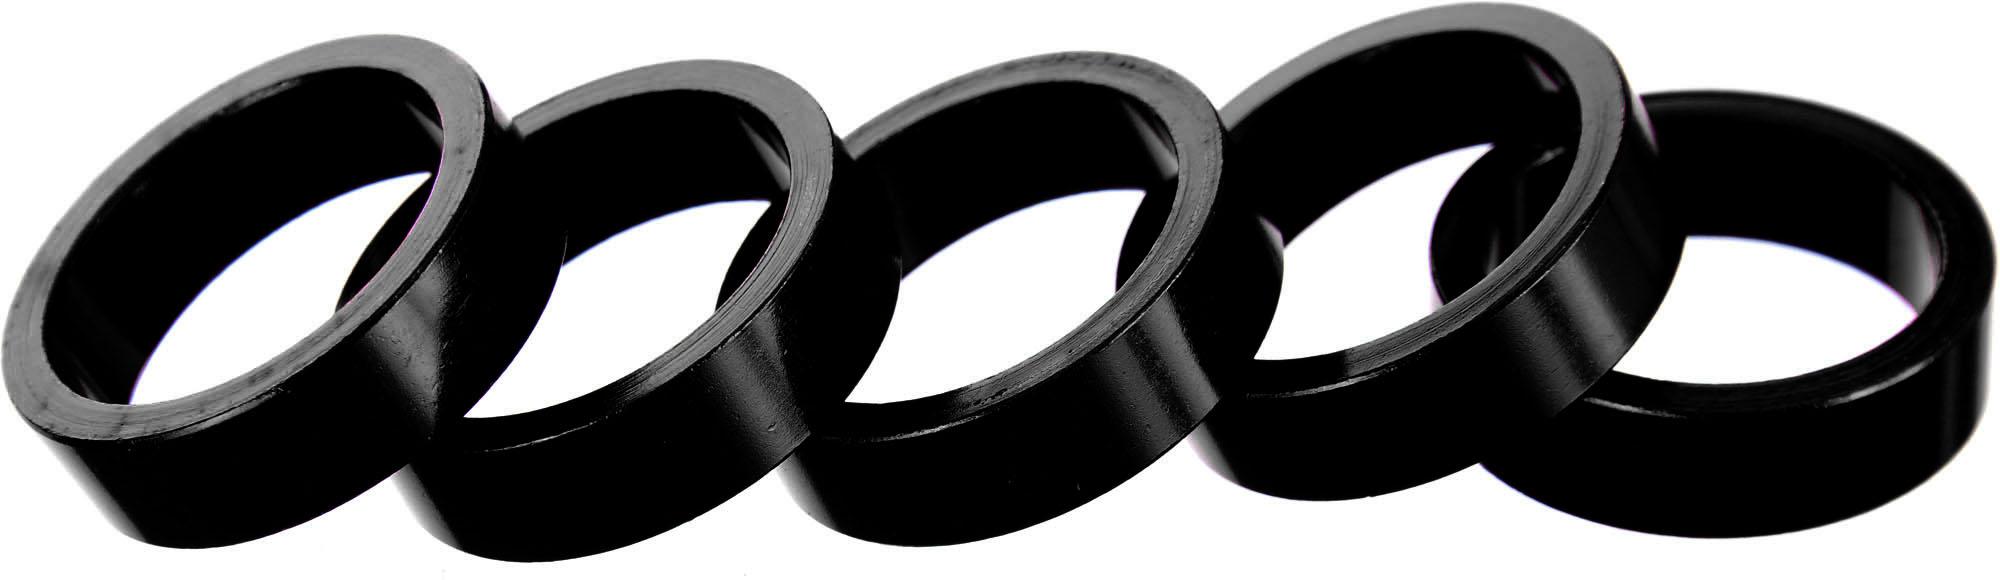 Brand-x Alloy Headset Spacers (5x10mm)  Black